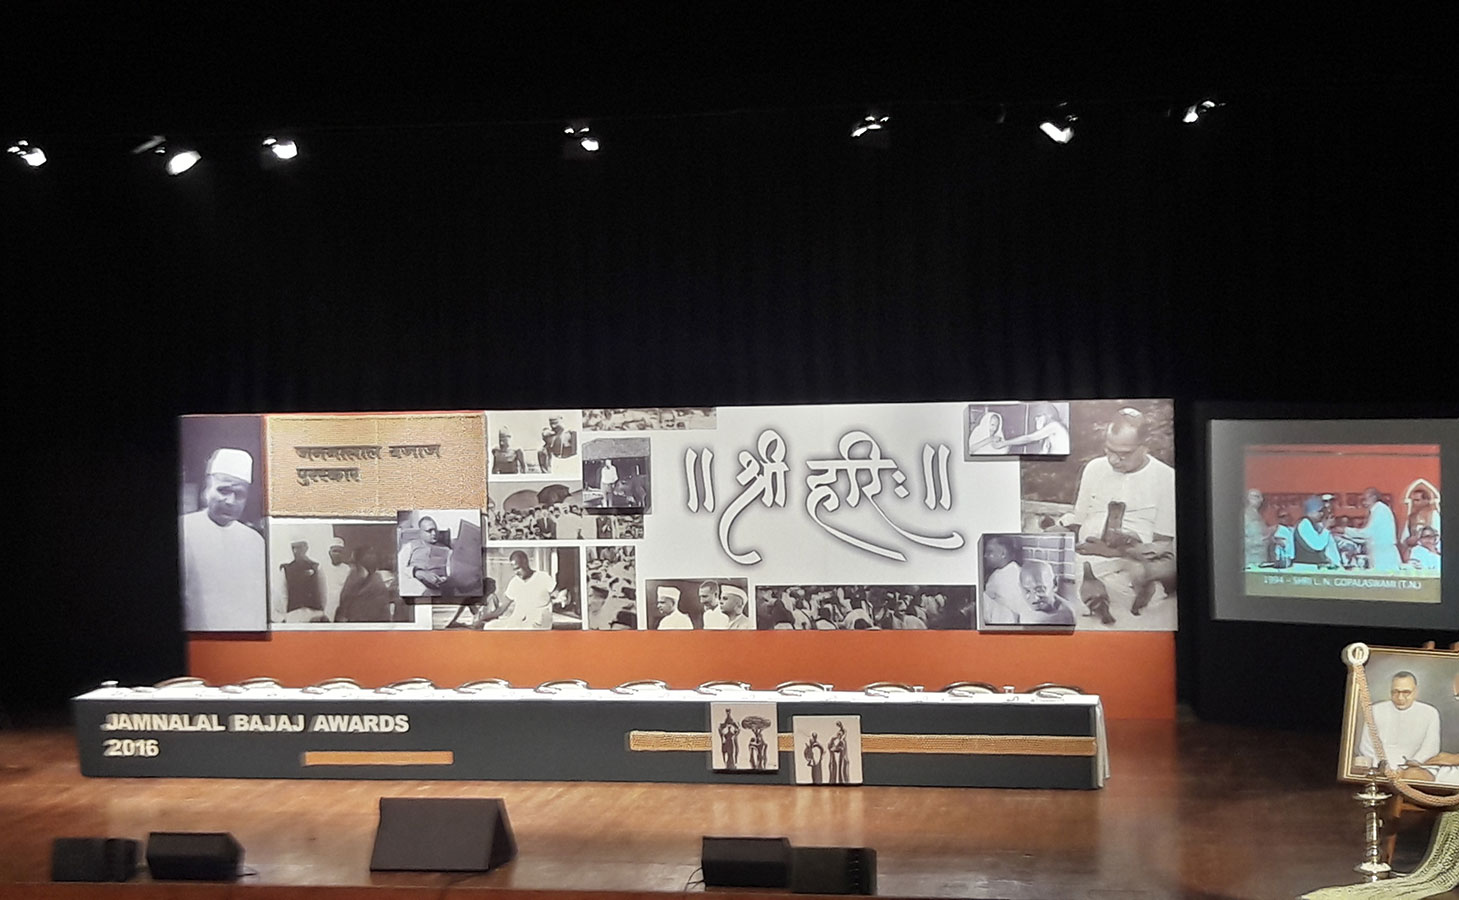 The stage is set for the beginning of the Jamnalal Bajaj Awards Ceremony (November, 2015)